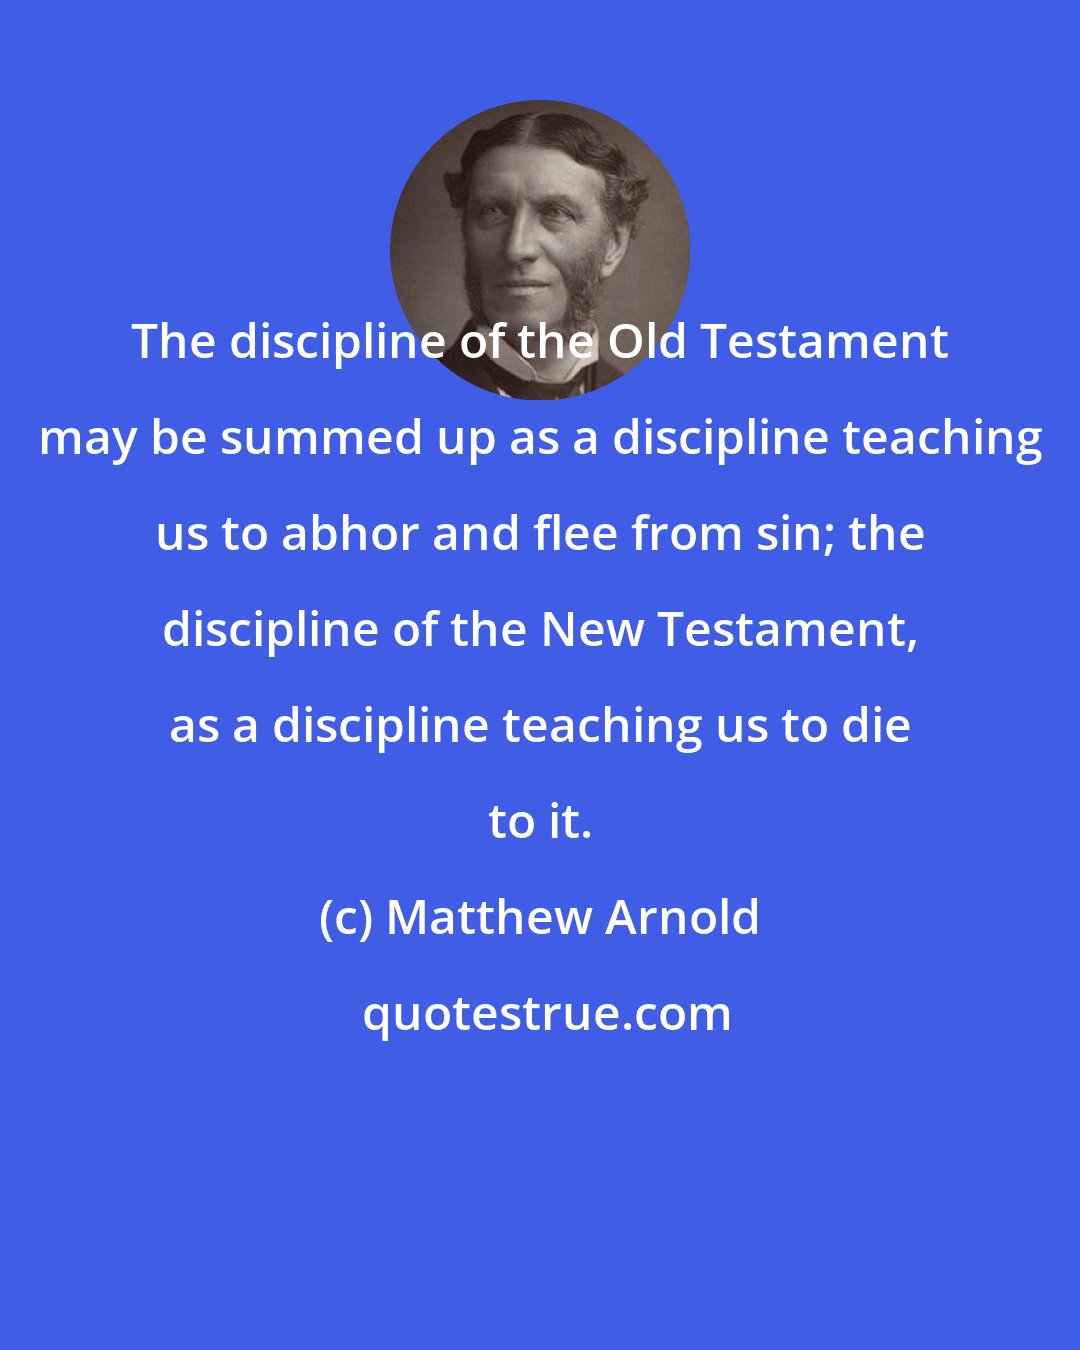 Matthew Arnold: The discipline of the Old Testament may be summed up as a discipline teaching us to abhor and flee from sin; the discipline of the New Testament, as a discipline teaching us to die to it.